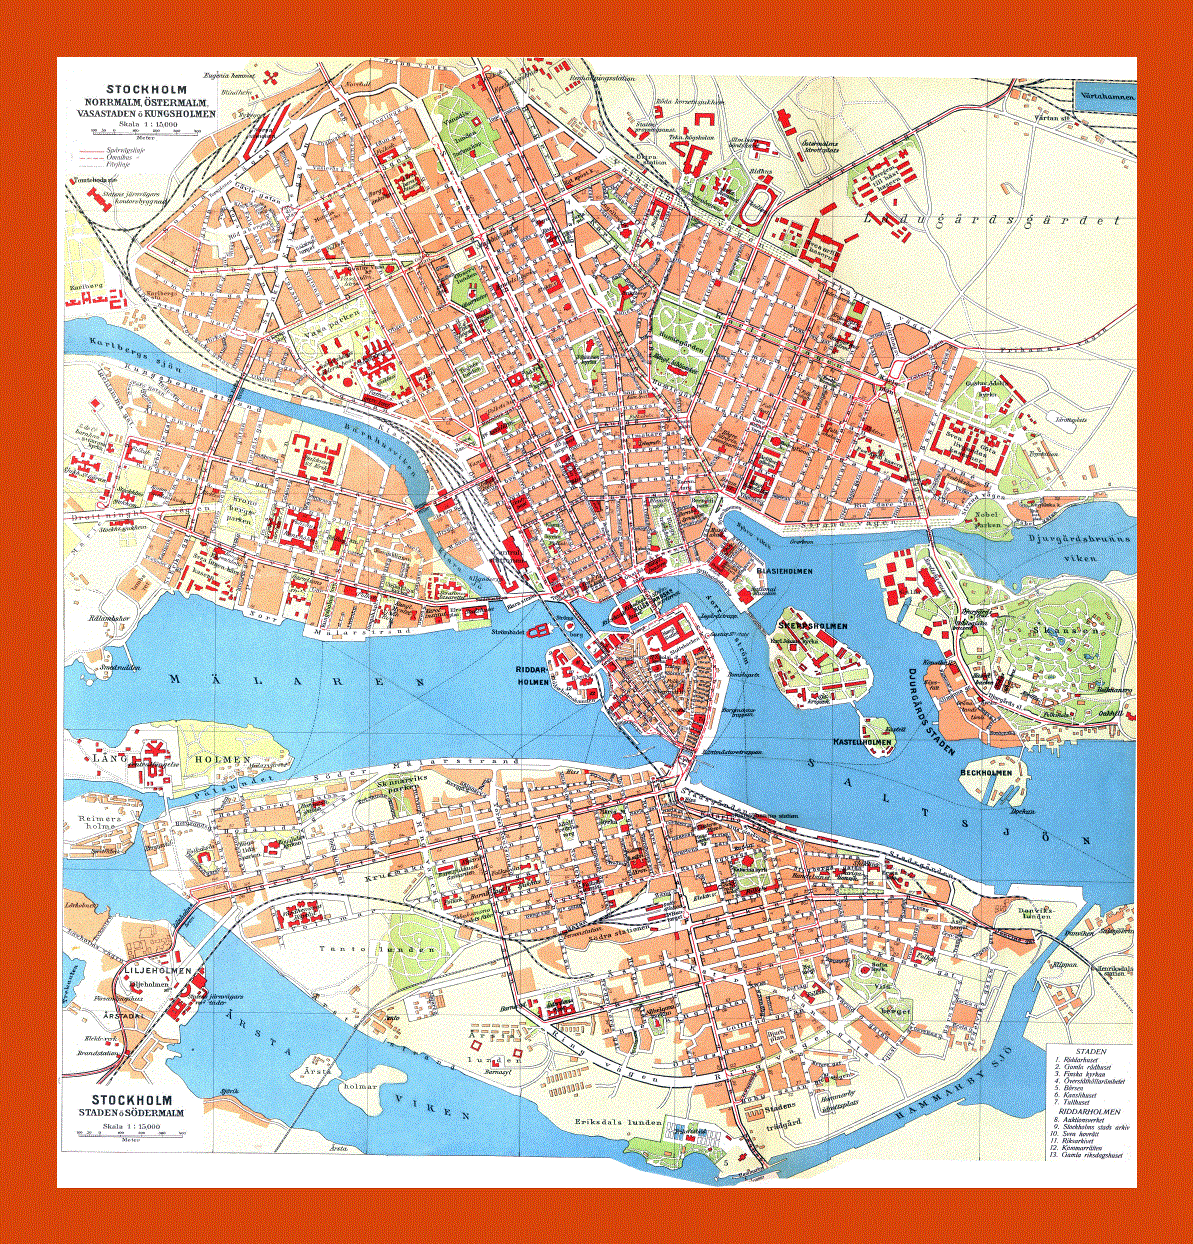 Old map of Stockholm city